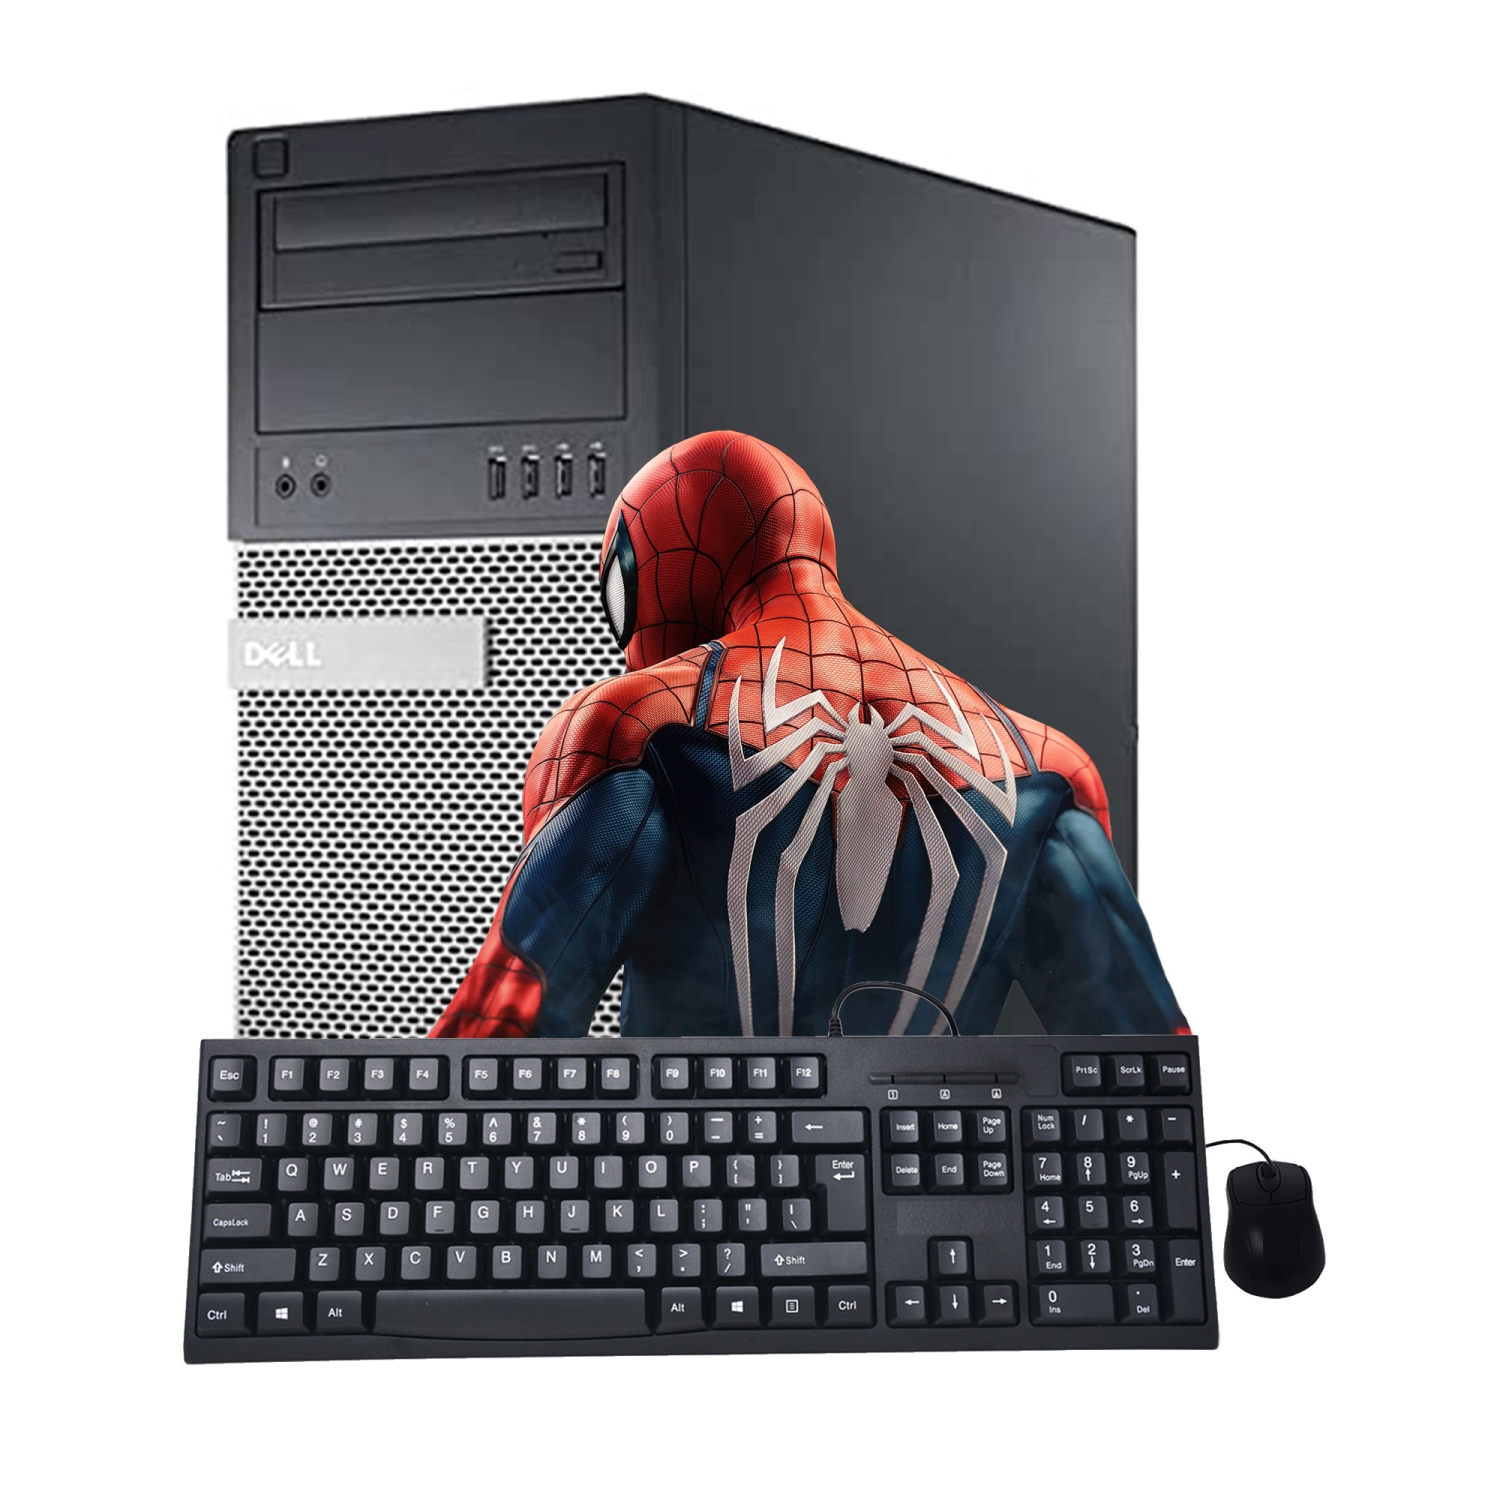 Refurbished (Good) - Gaming Desktop Computer Dell 7020 Tower Intel I7 4770 upto 3.90 Ghz 32GB DDR3 RAM New 1TB SSD Nvidia GeForce GTX 1650 Keyboard & Mouse Wifi Win 10 Home